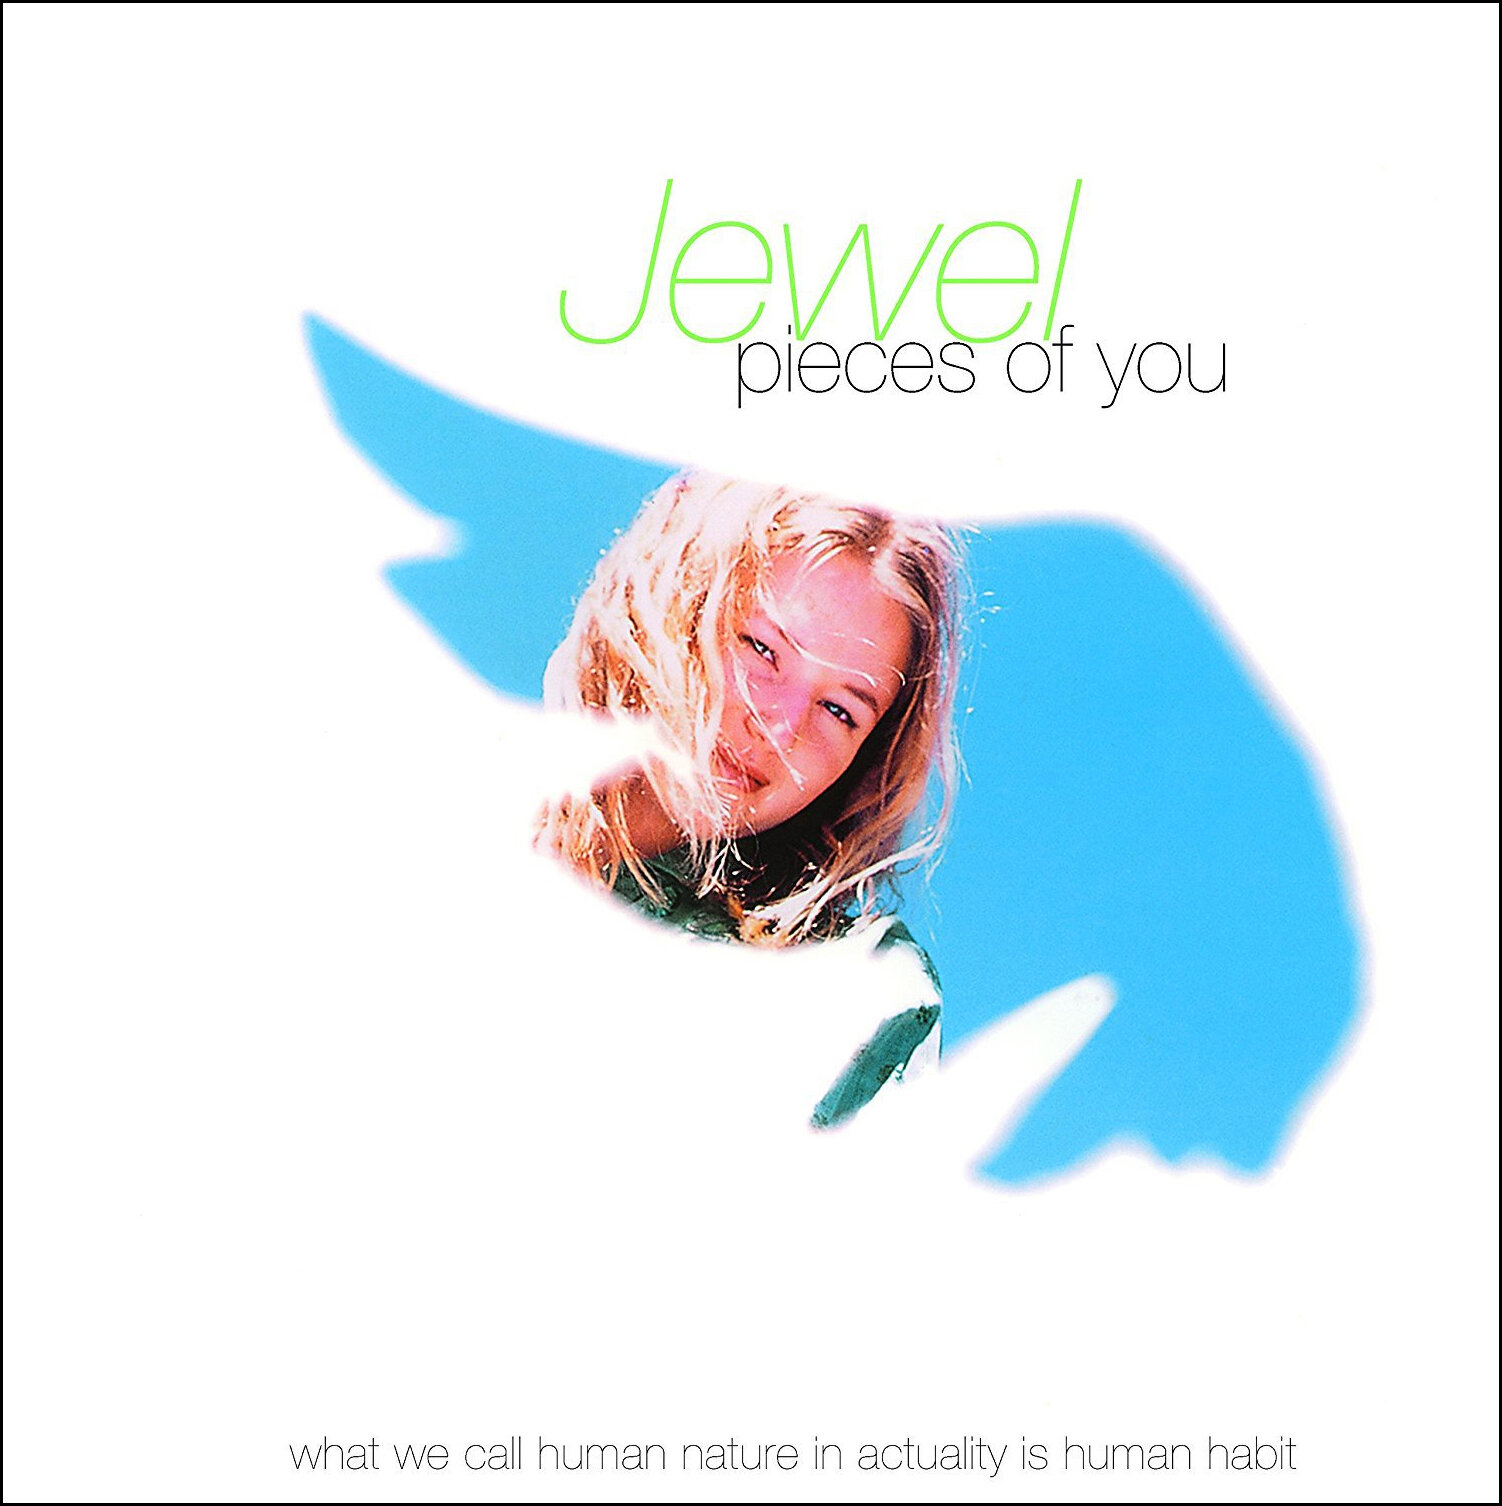 An album cover, with the title "pieces of you" and text reading "what we call human nature in actuality is human habit." The cover image is Jewel, smiling with hair blowing in her face in a wing-shaped cutout.